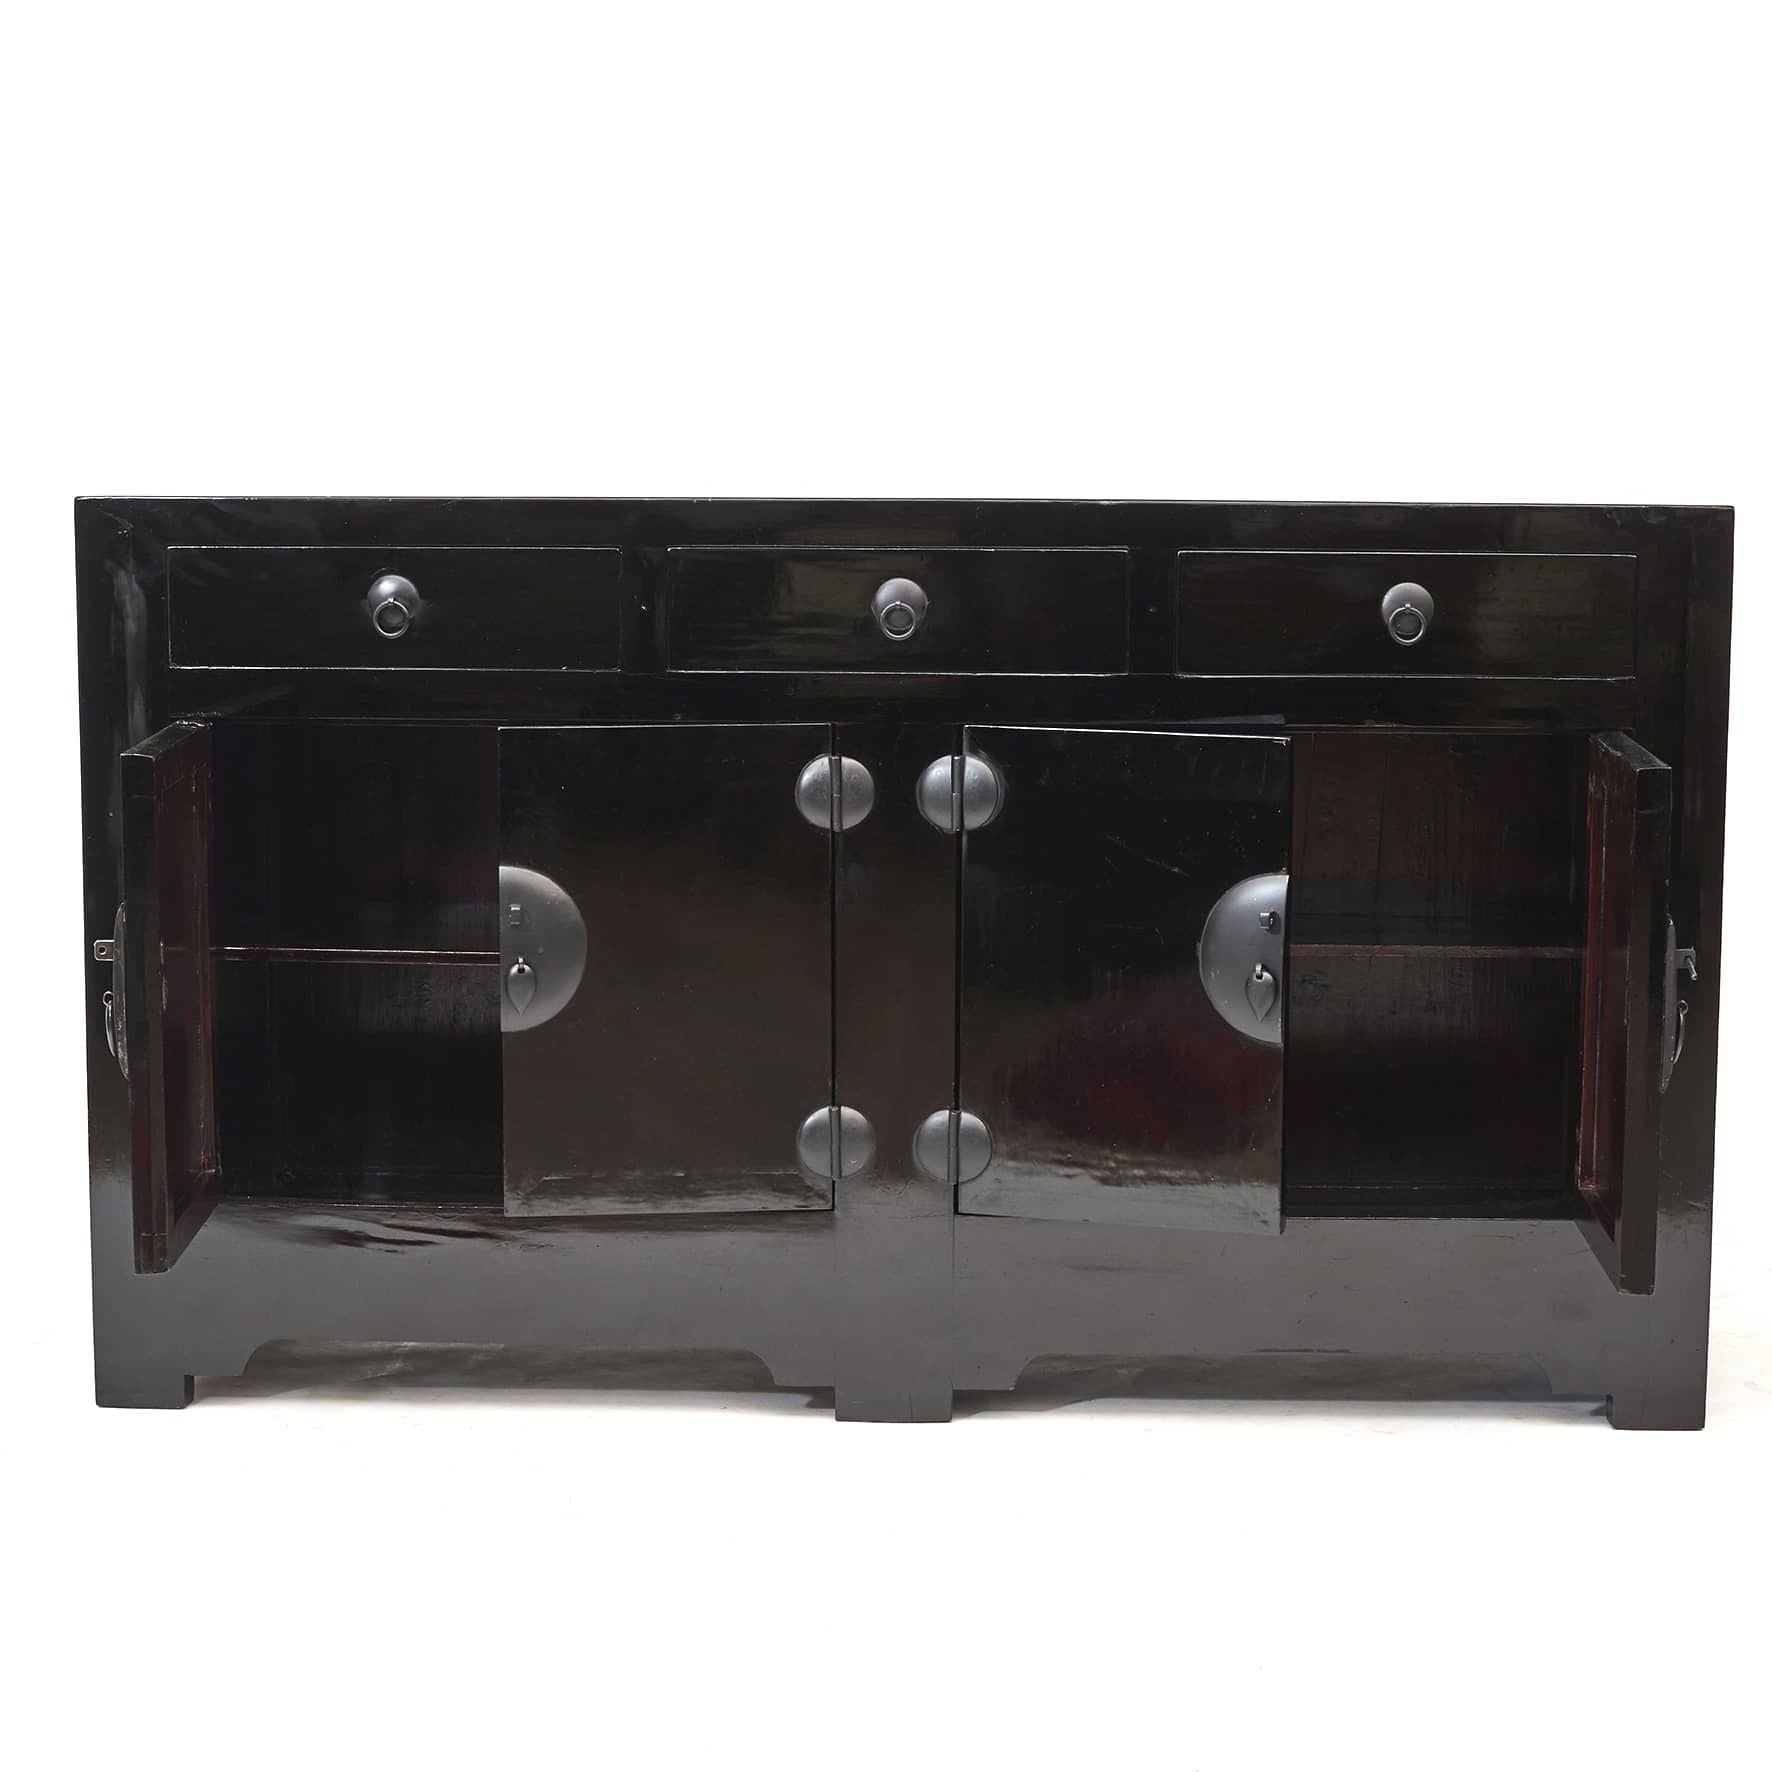 Black lacquer sideboard cabinet from Tianjin.
Under the top are 3 large drawers and a main section that consists of 2 pairs of doors. Drawers and cabinet doors have black patinated metal fittings and pull handles.
Timeless design clean lines and